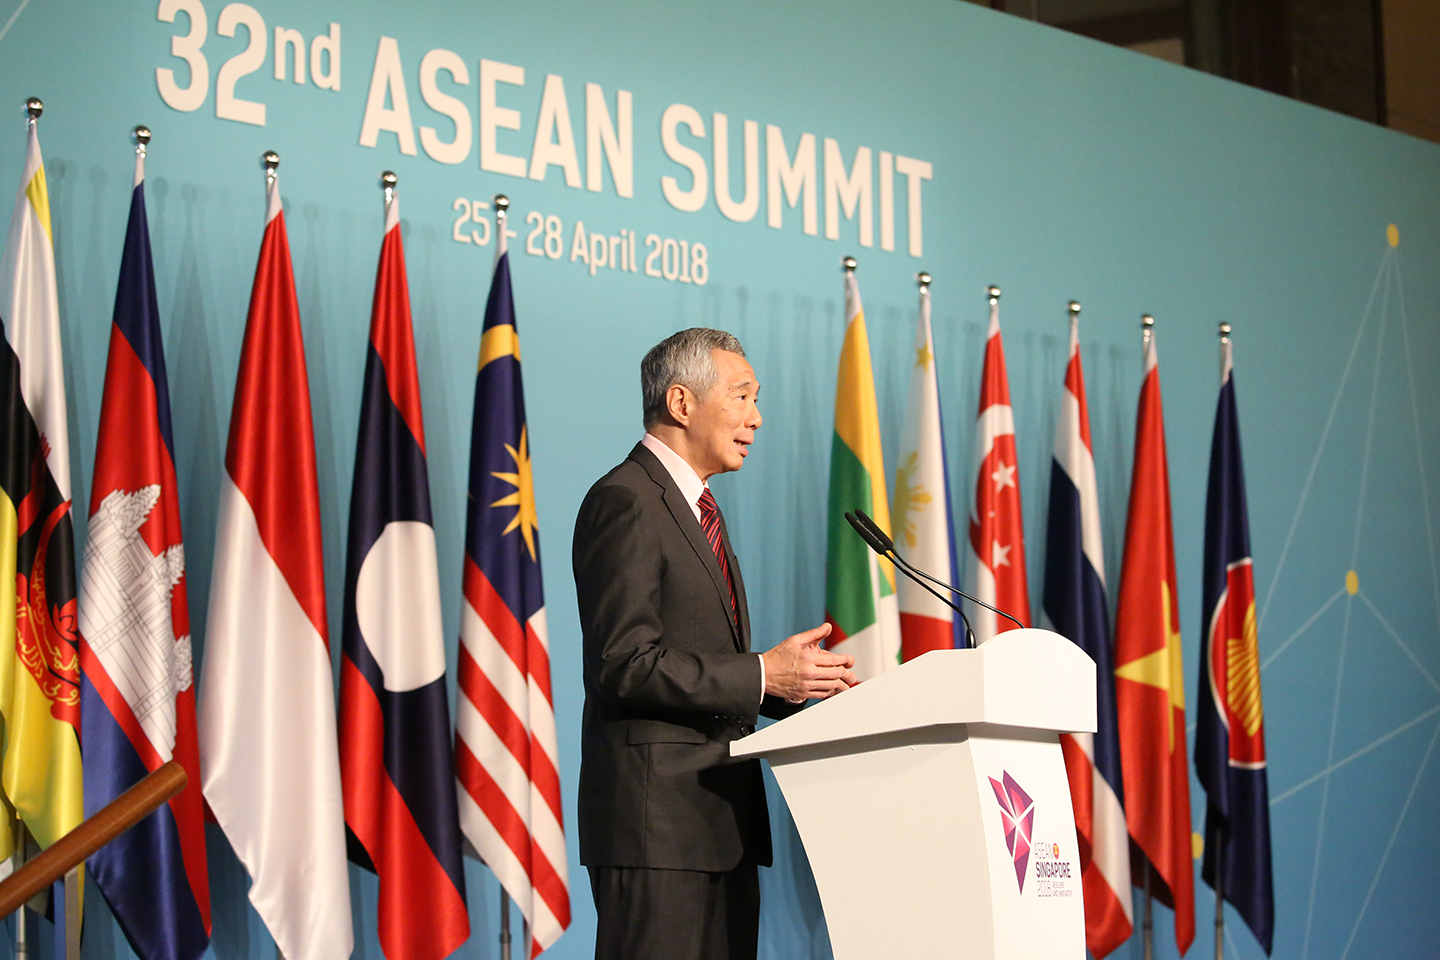 PM Lee Hsien Loong at the 32nd ASEAN Summit on 28 Apr 2018 (MCI Photo by Betty Chua)